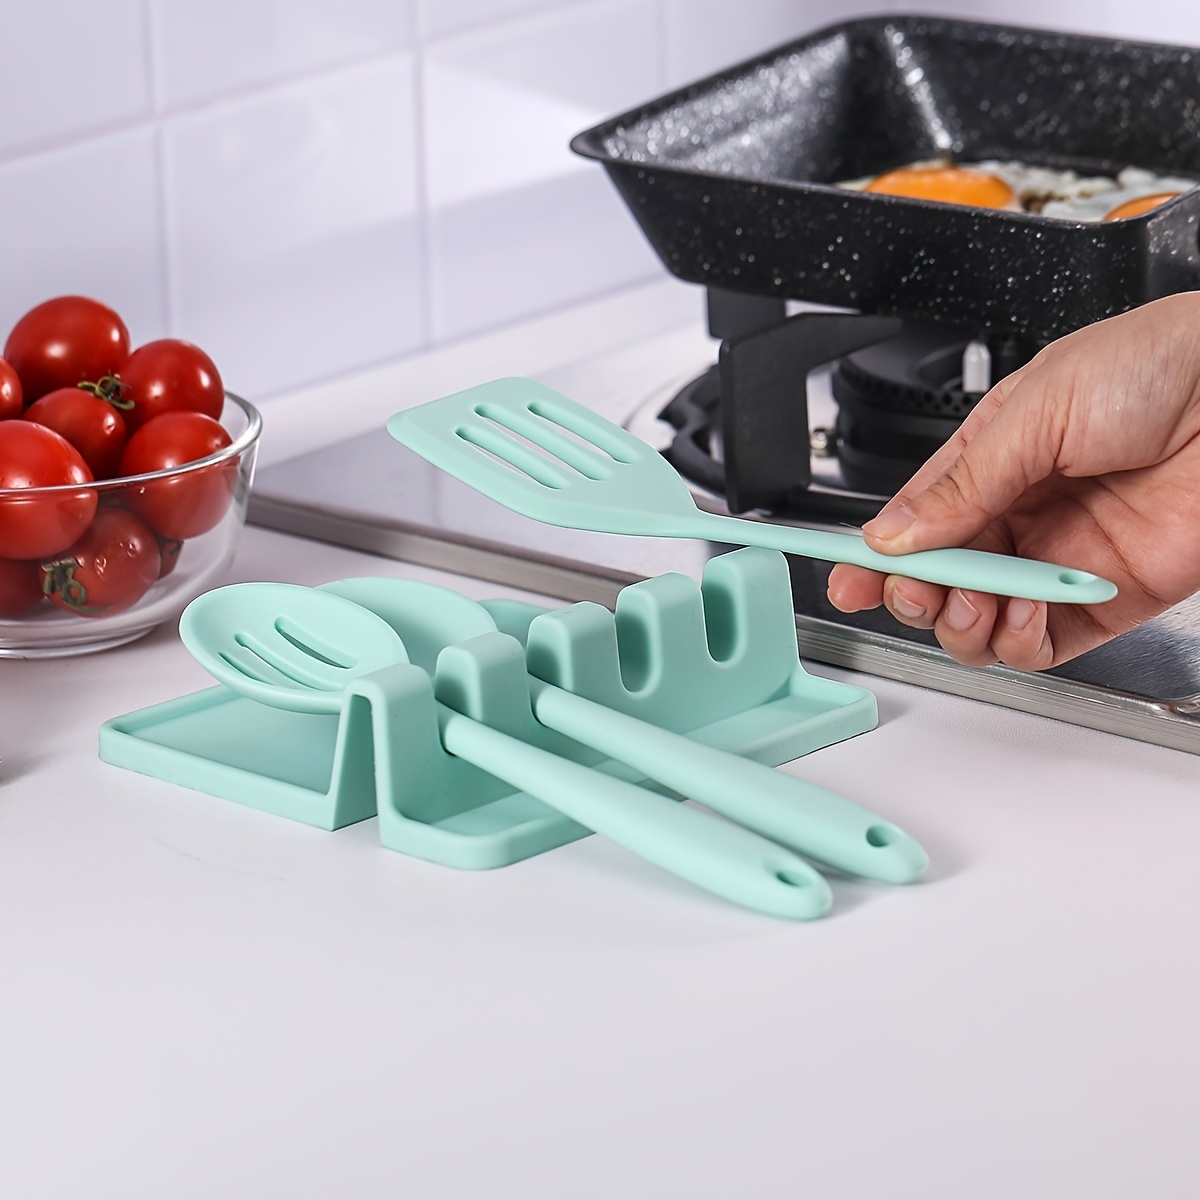  OTOTO Red the Crab Silicone Utensil Rest - Kitchen Gifts,  Silicone Spoon Rest for Stove Top - Heat-Resistant Kitchen and Grill Utensil  Holder - Non-Slip Spoon Holder Stove Organizer, Steam Releaser